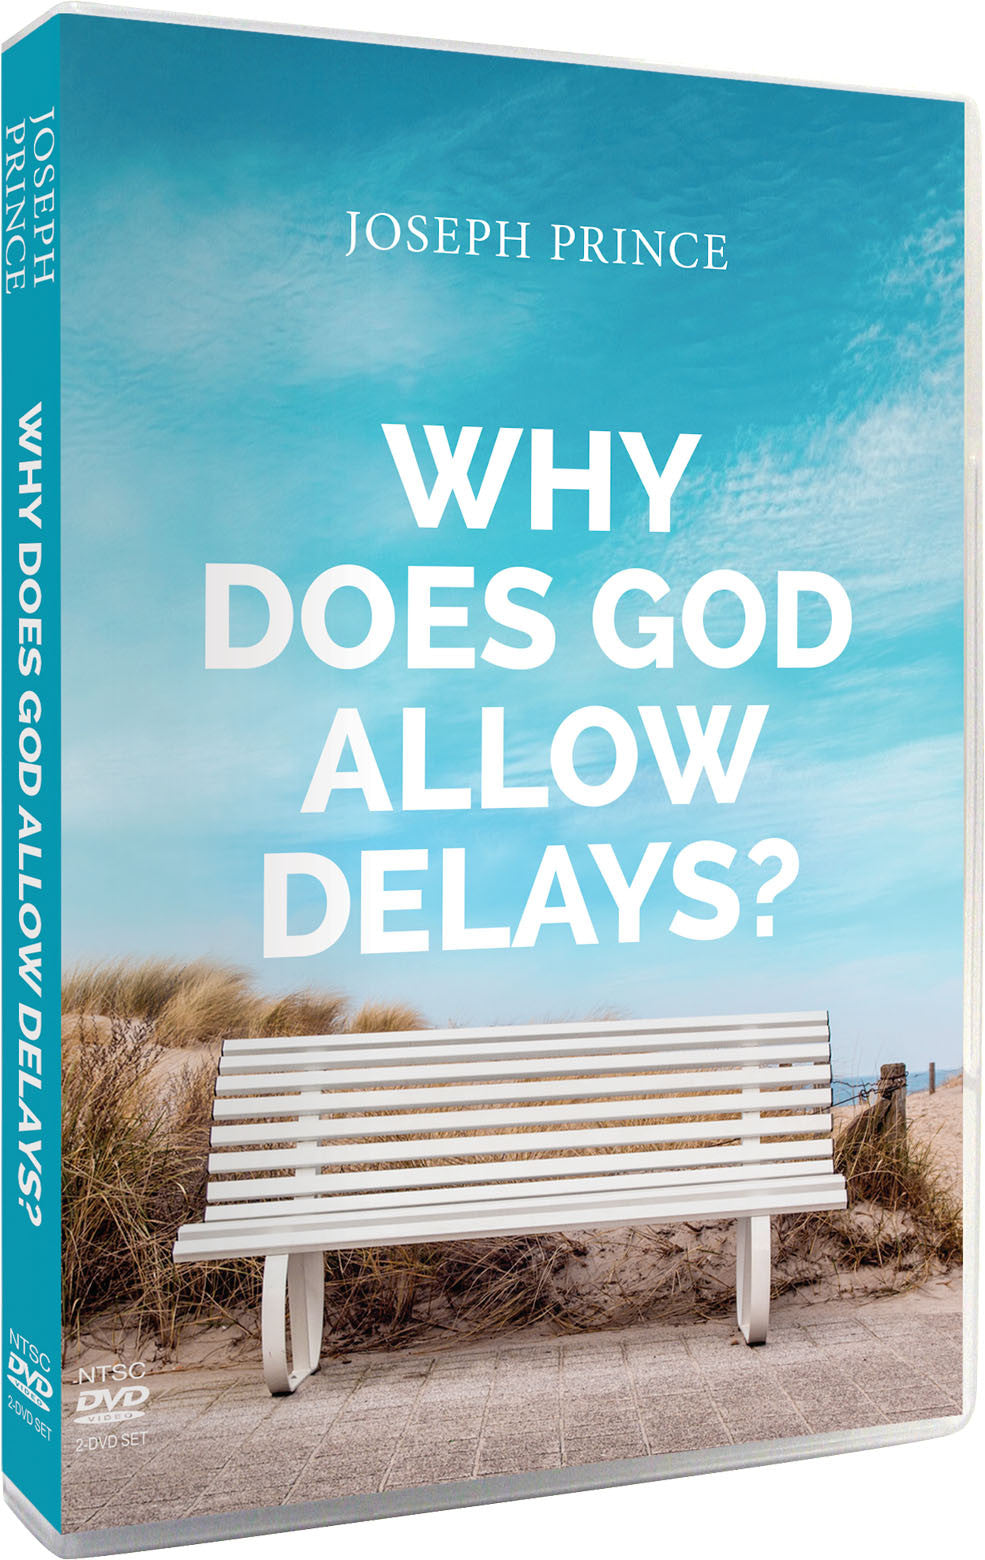 Why Does God Allow Delays? (DVD Album)